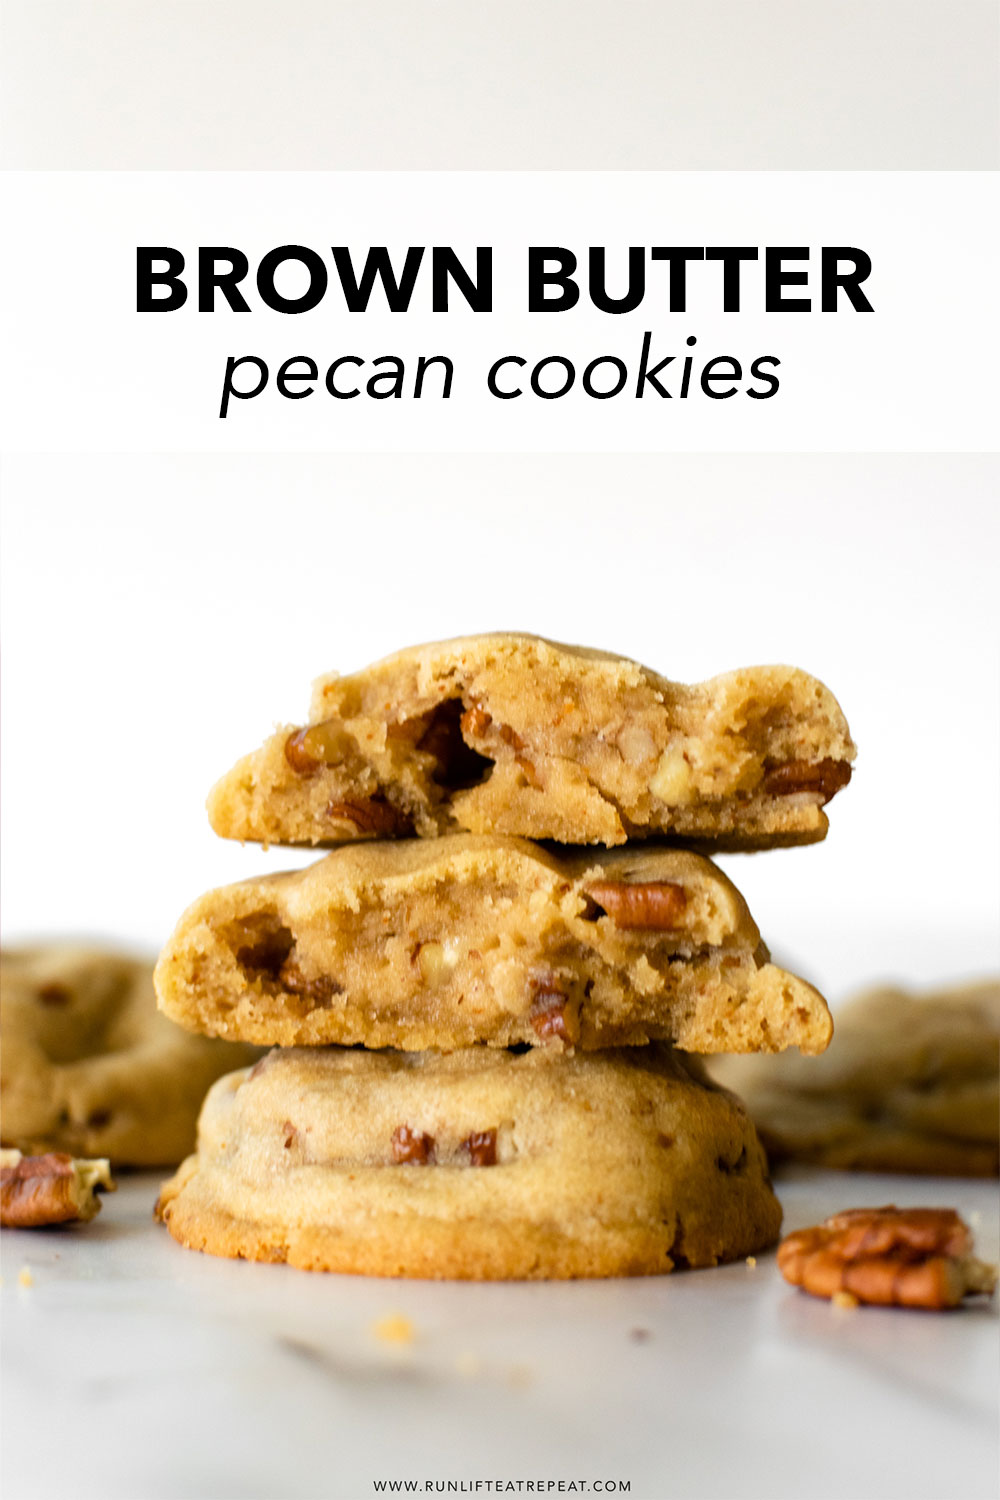 These brown butter pecan cookies have soft centers, slightly crispy edges and a nutty flavor from the brown butter. There's no doubt that these will be a hit with your family!